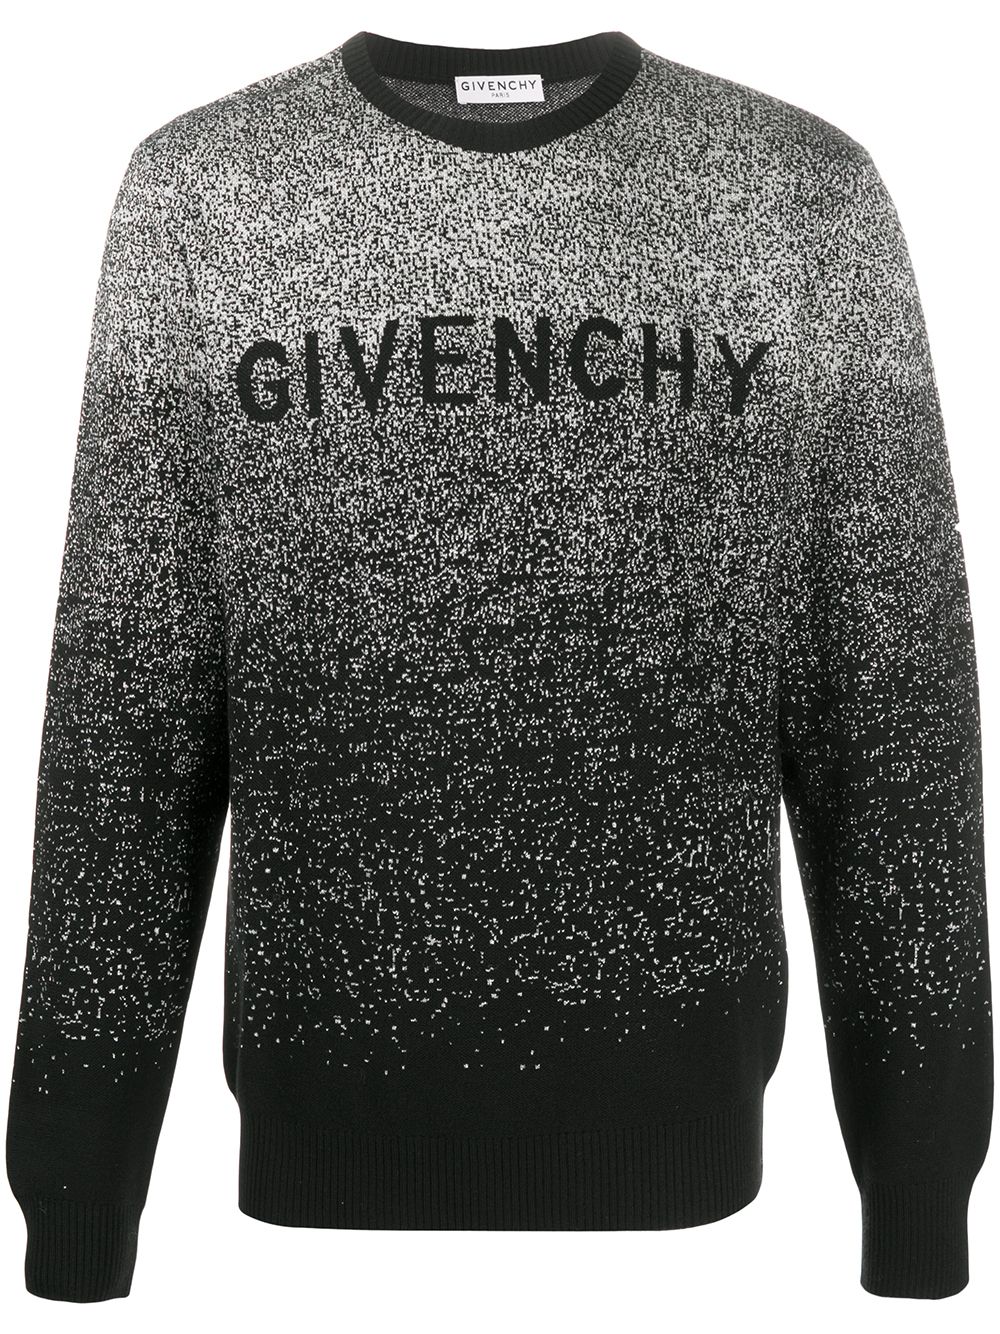 https://cdn-images.farfetch-contents.com/givenchy-gradient-effect-knitted-jumper_15615765_28704900_1000.jpg